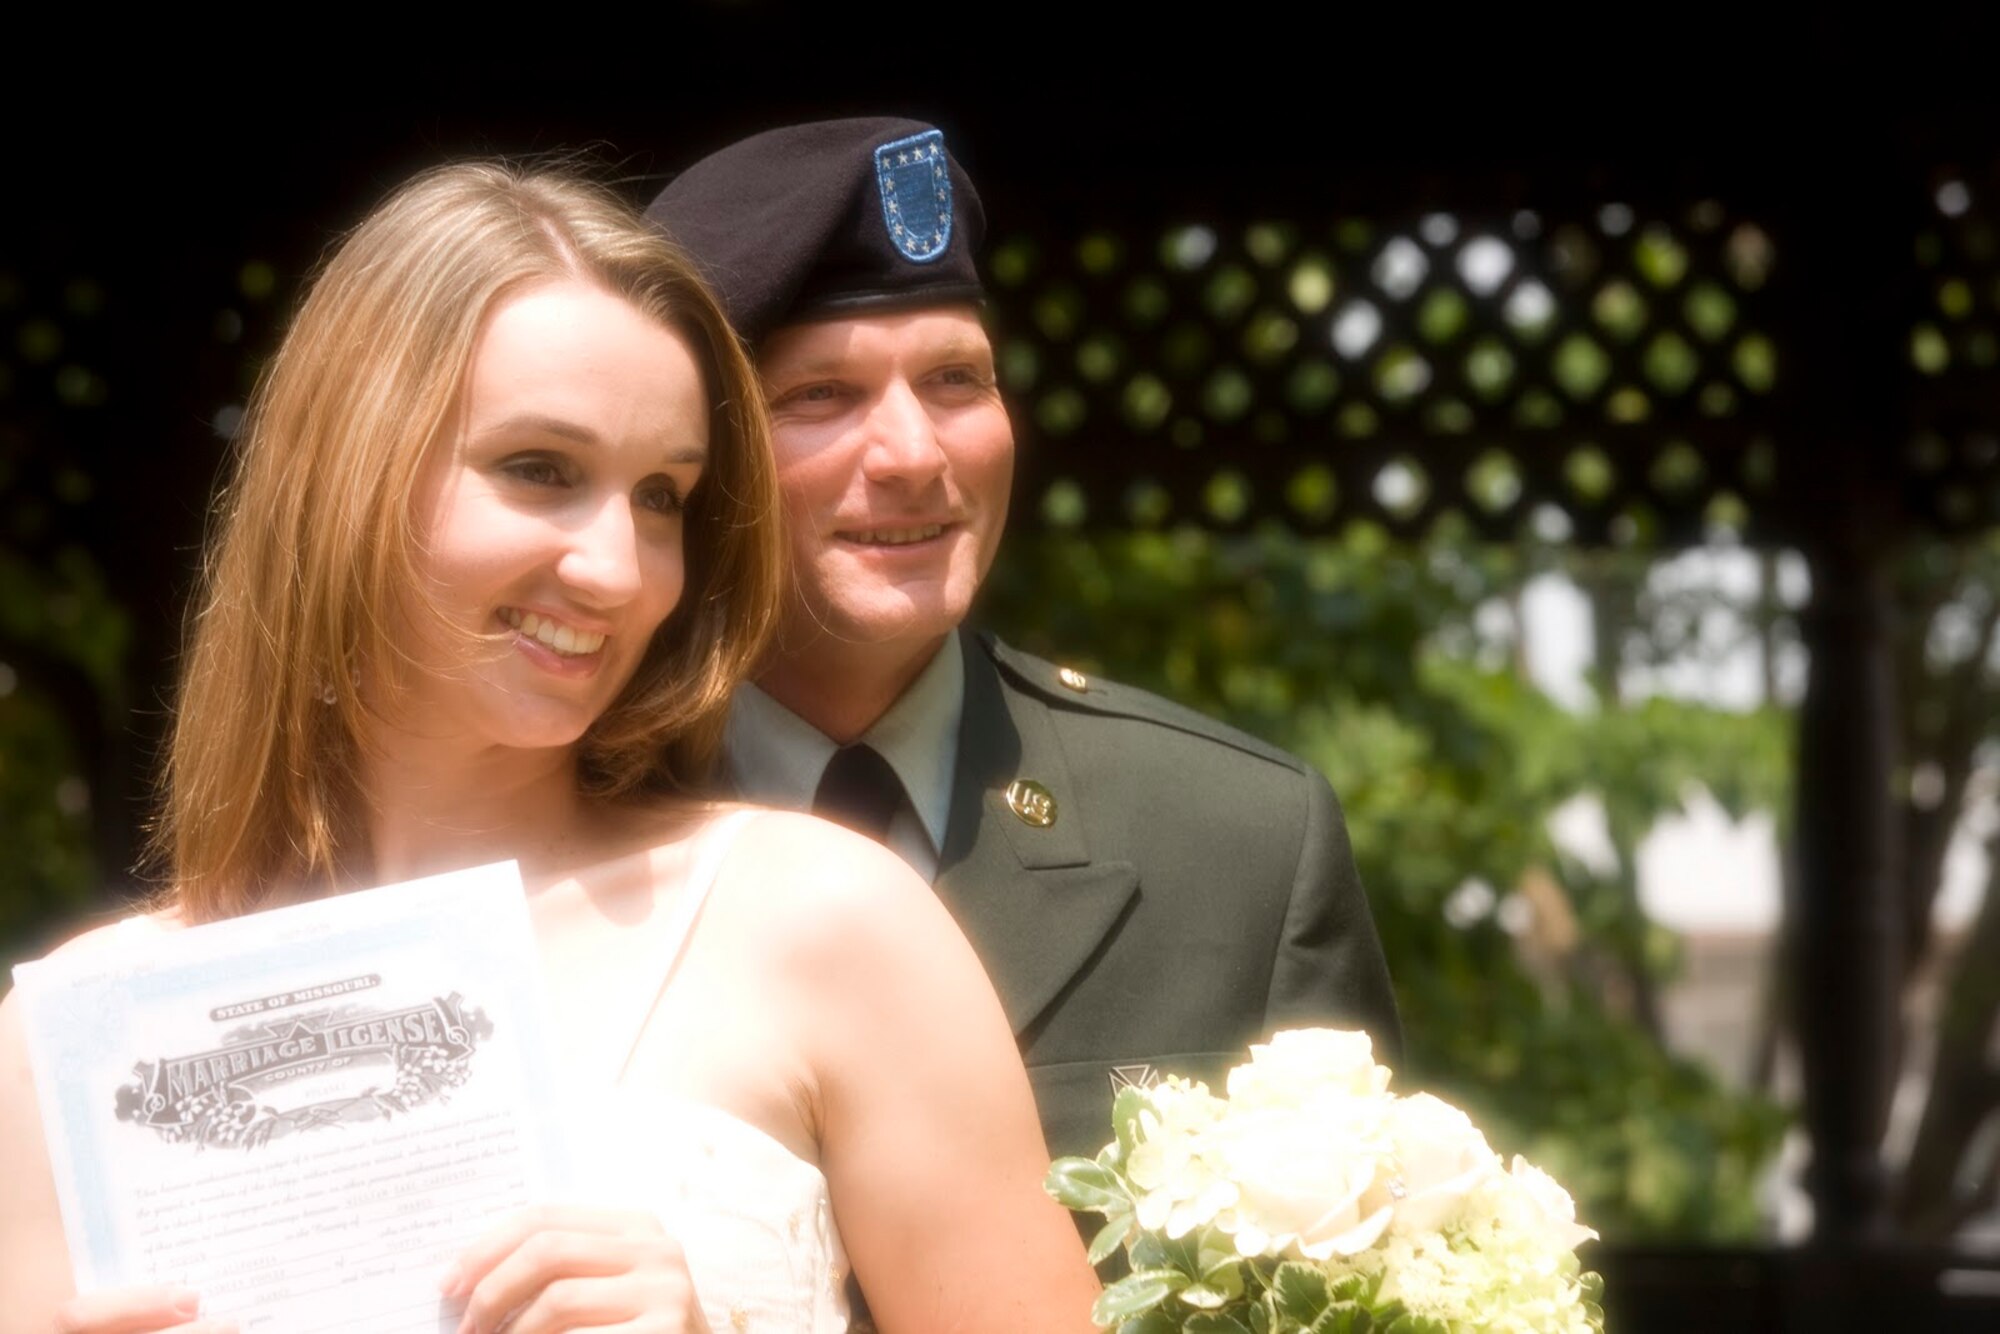 Senior Airman Erin Carpenter, left, smiles for a wedding photo with her husband. Both were married in ??? (Couresy photo)